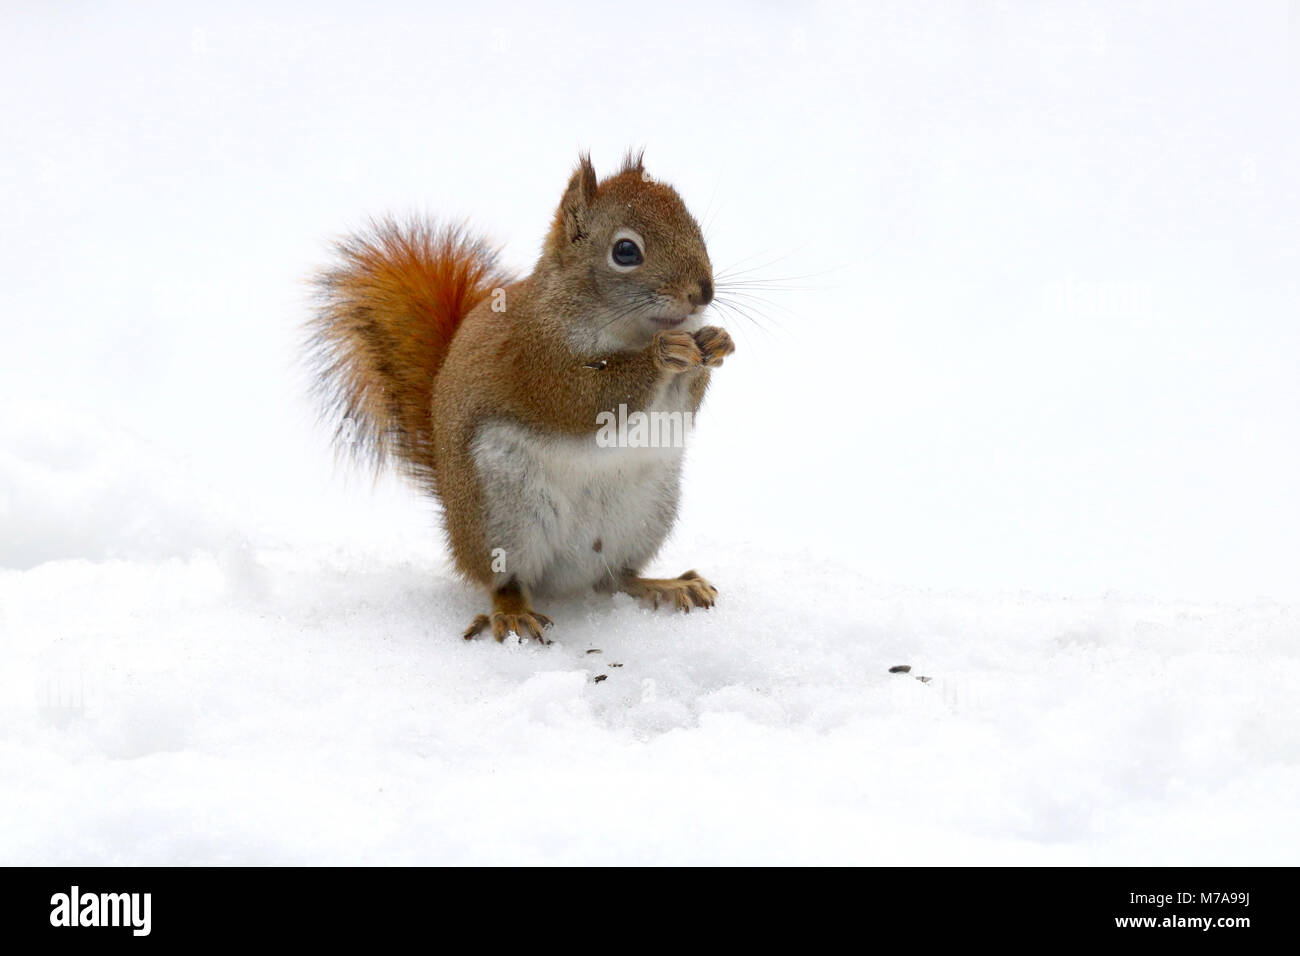 A little American Red Squirrel (Tamiasciurus hudsonicus) searching for food on a snowy day. Stock Photo